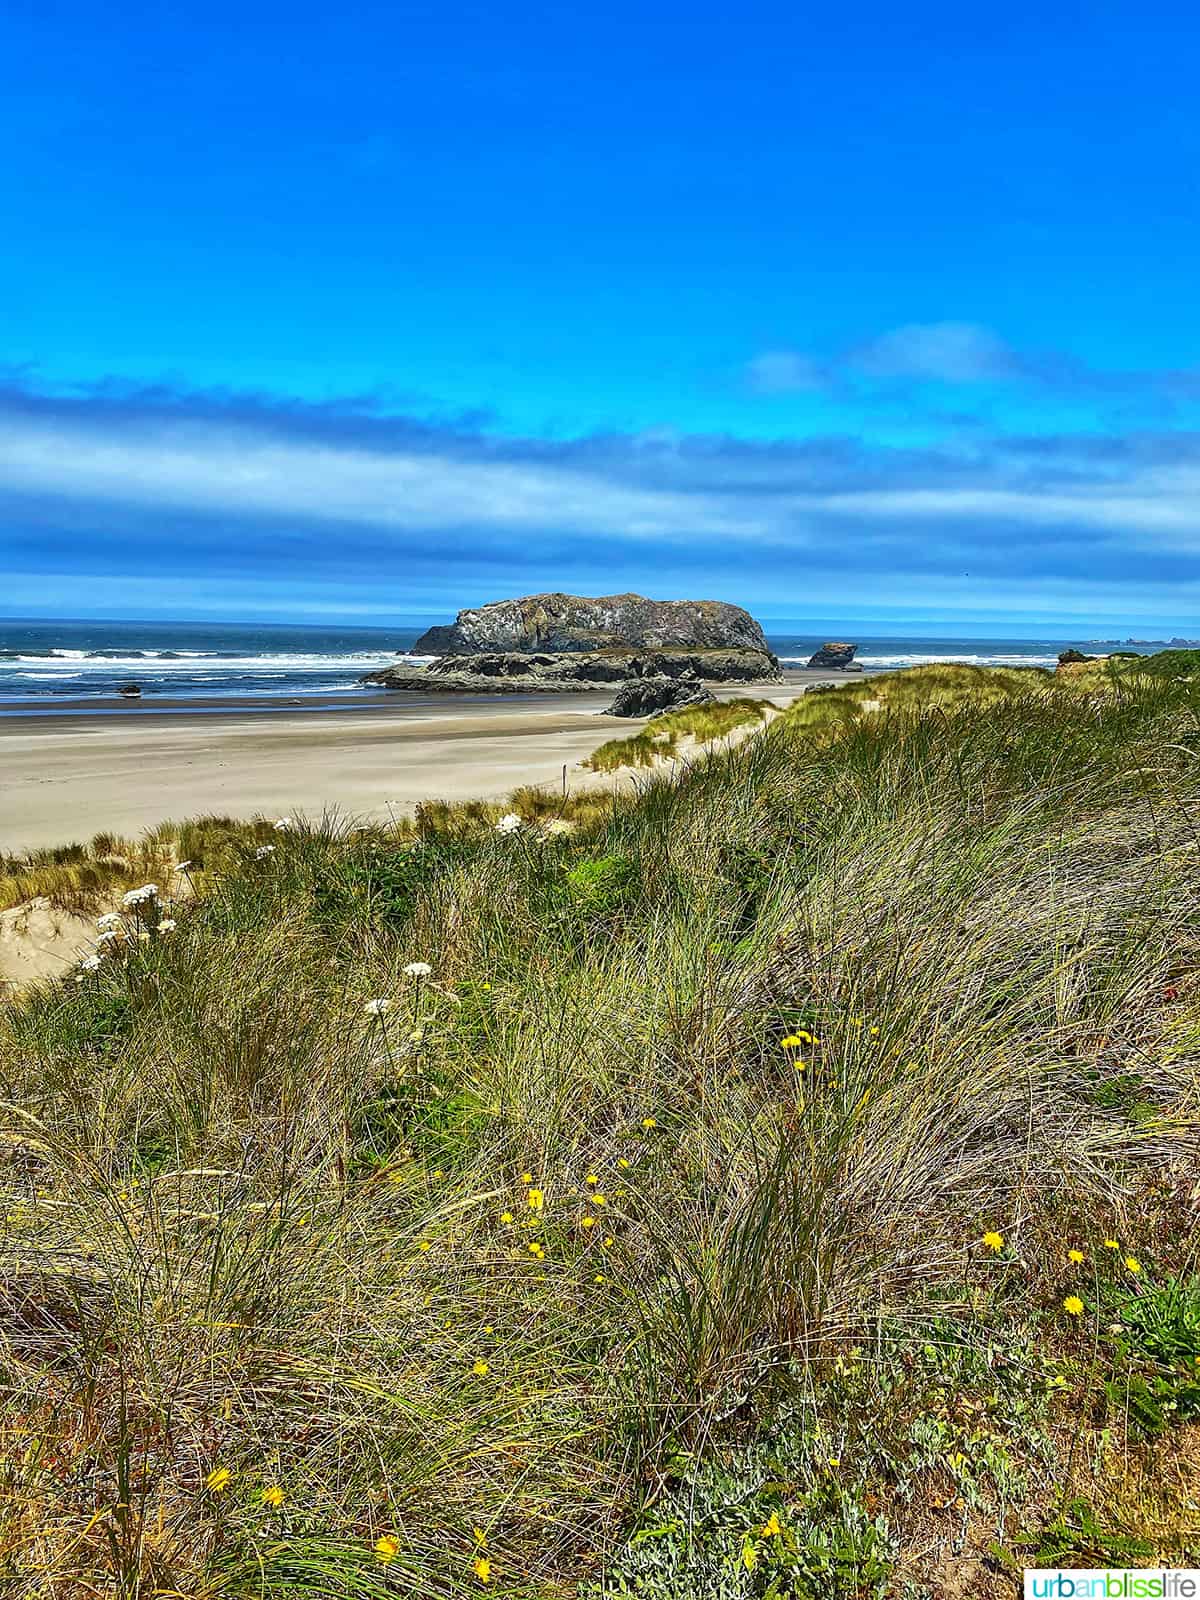 wildflowers on the beach at bandon, oregon